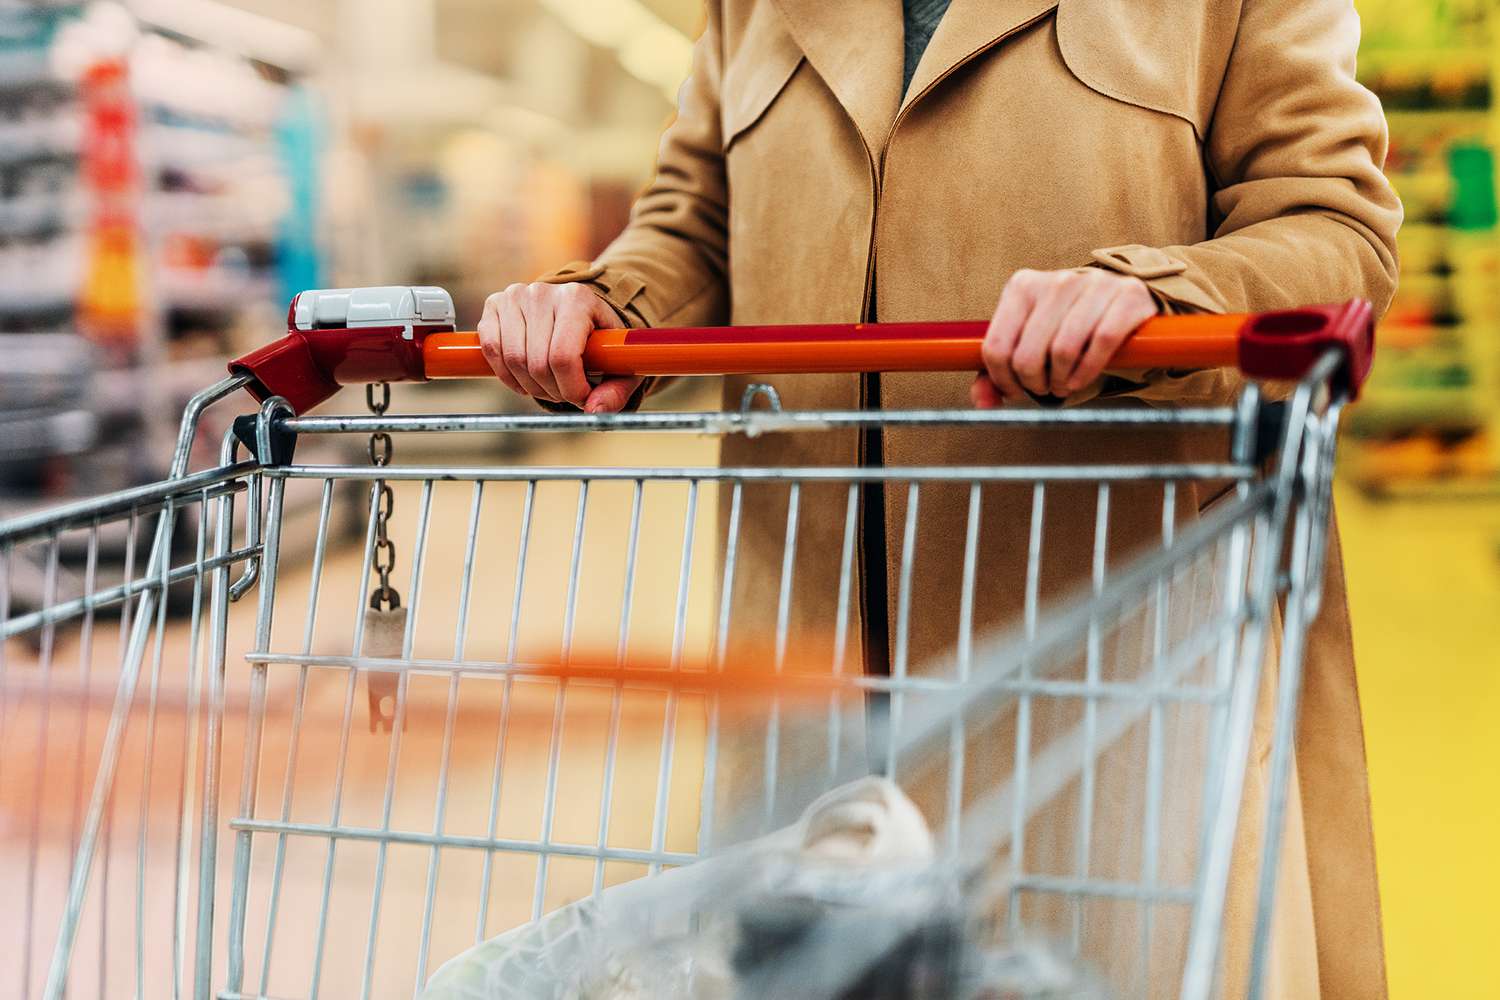 7. Helpful Grocery Store Habits That Are Actually Rude